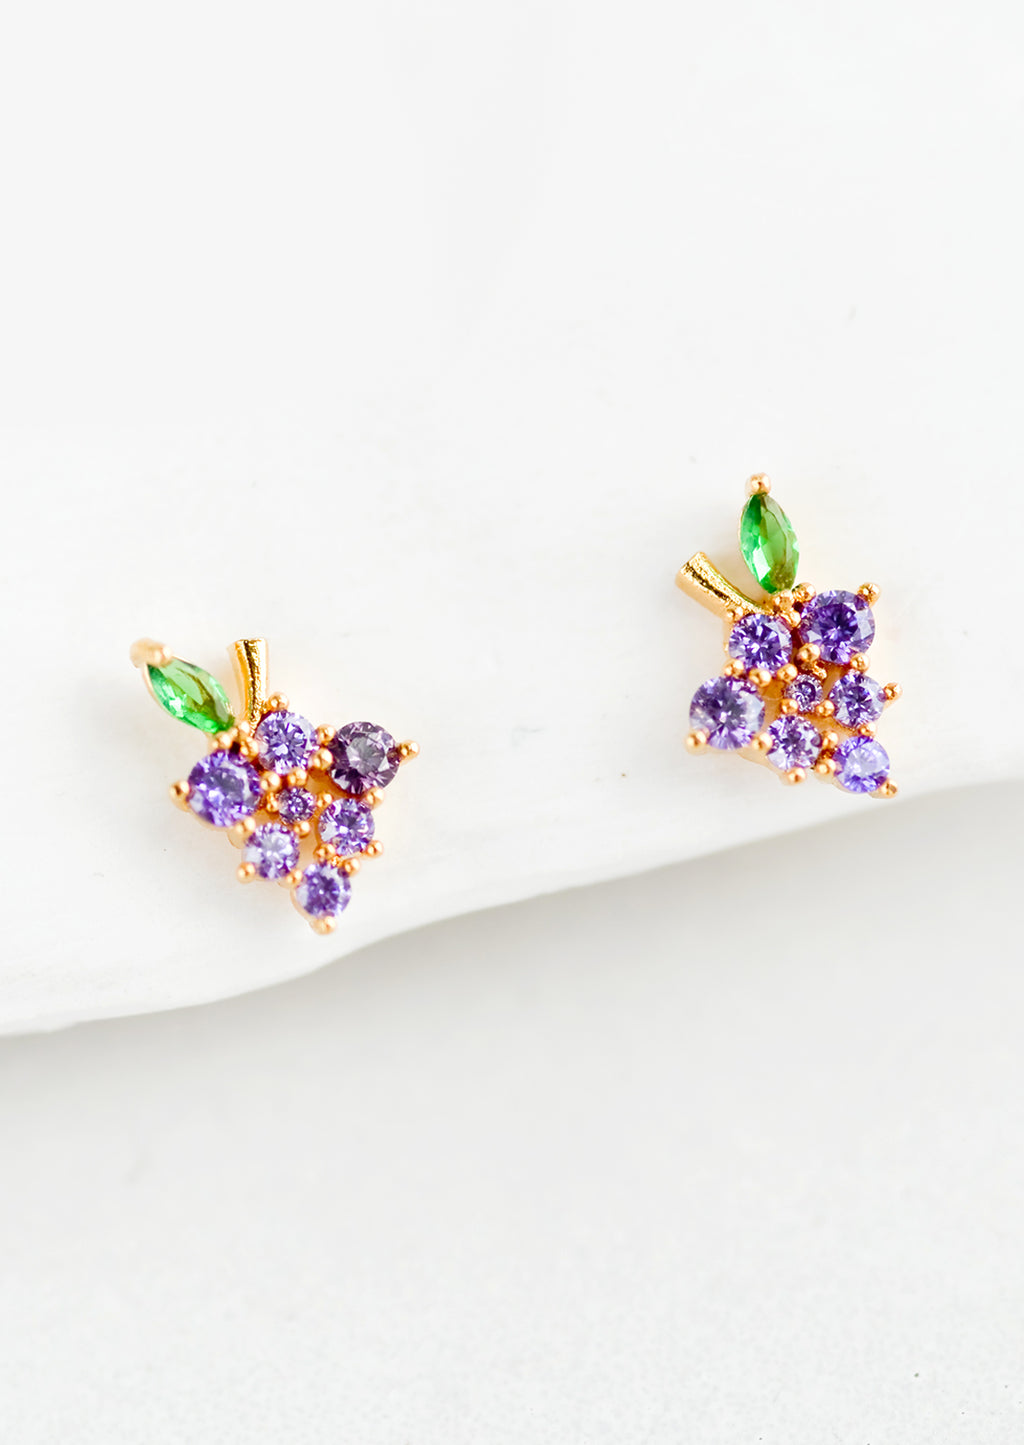 Grape: A pair of small crystal stud earrings in the shape of a bundle of grapes.